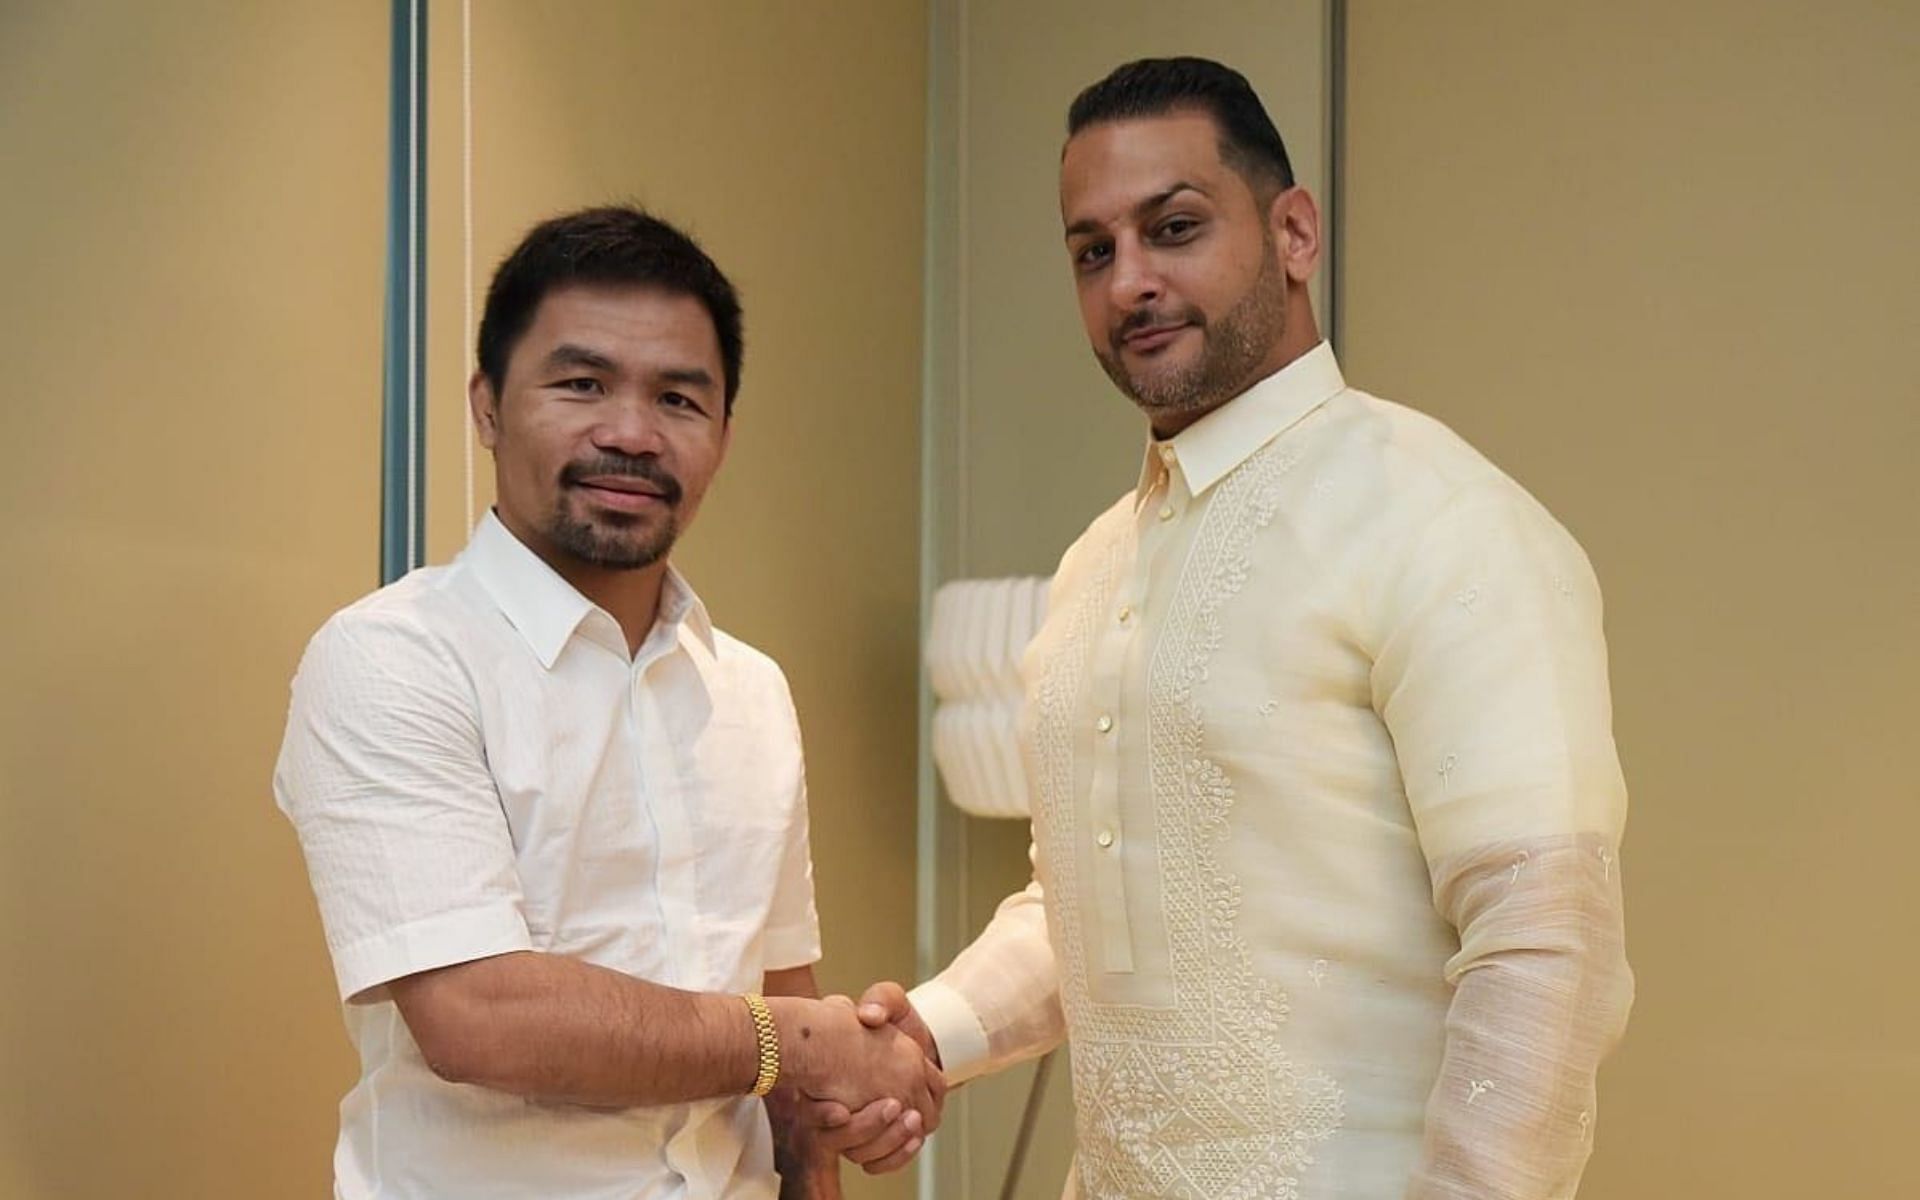 Manny Pacquiao [Left] Paradigm Sports CEO and owner Audie Attar [Right] [Image courtesy: @mmaturktr (Twitter)]